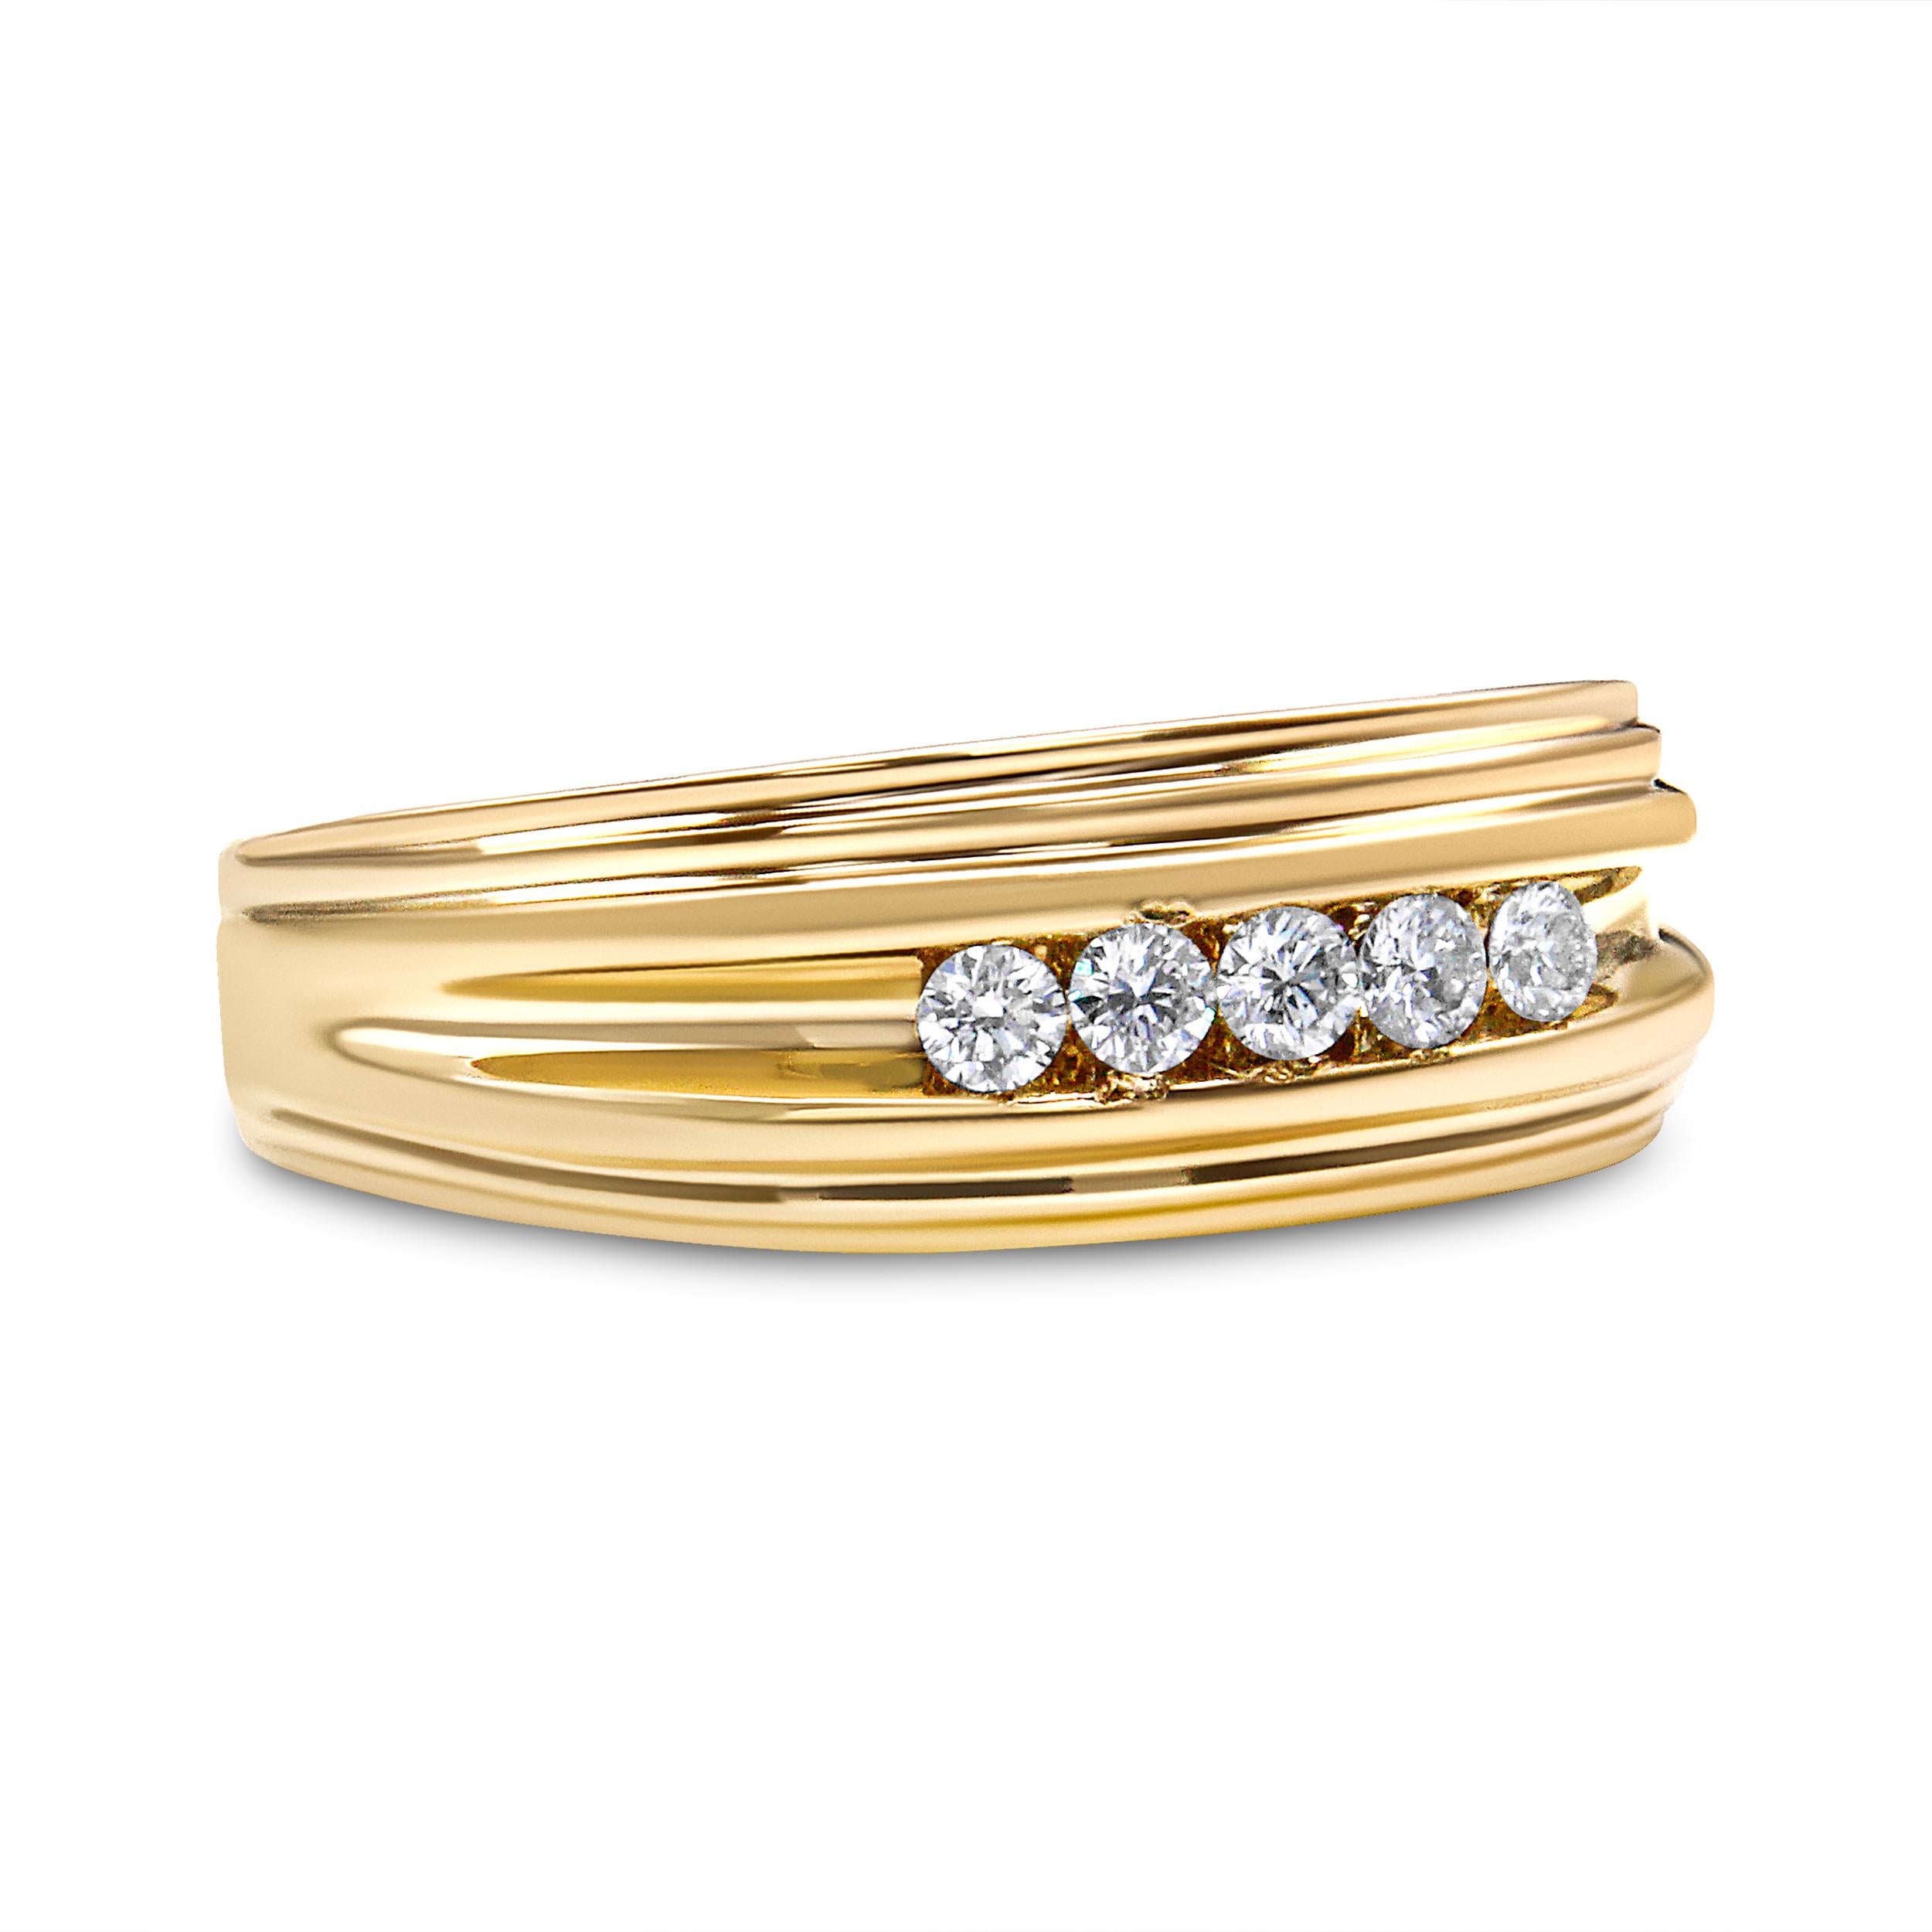 Bold and unique, this 5 stone diamond ring will add a touch of class to your everyday wear! Whether to the office or a formal night out, this band will dress up any look you put on. This piece is crafted in 10k yellow gold, a metal that will stay